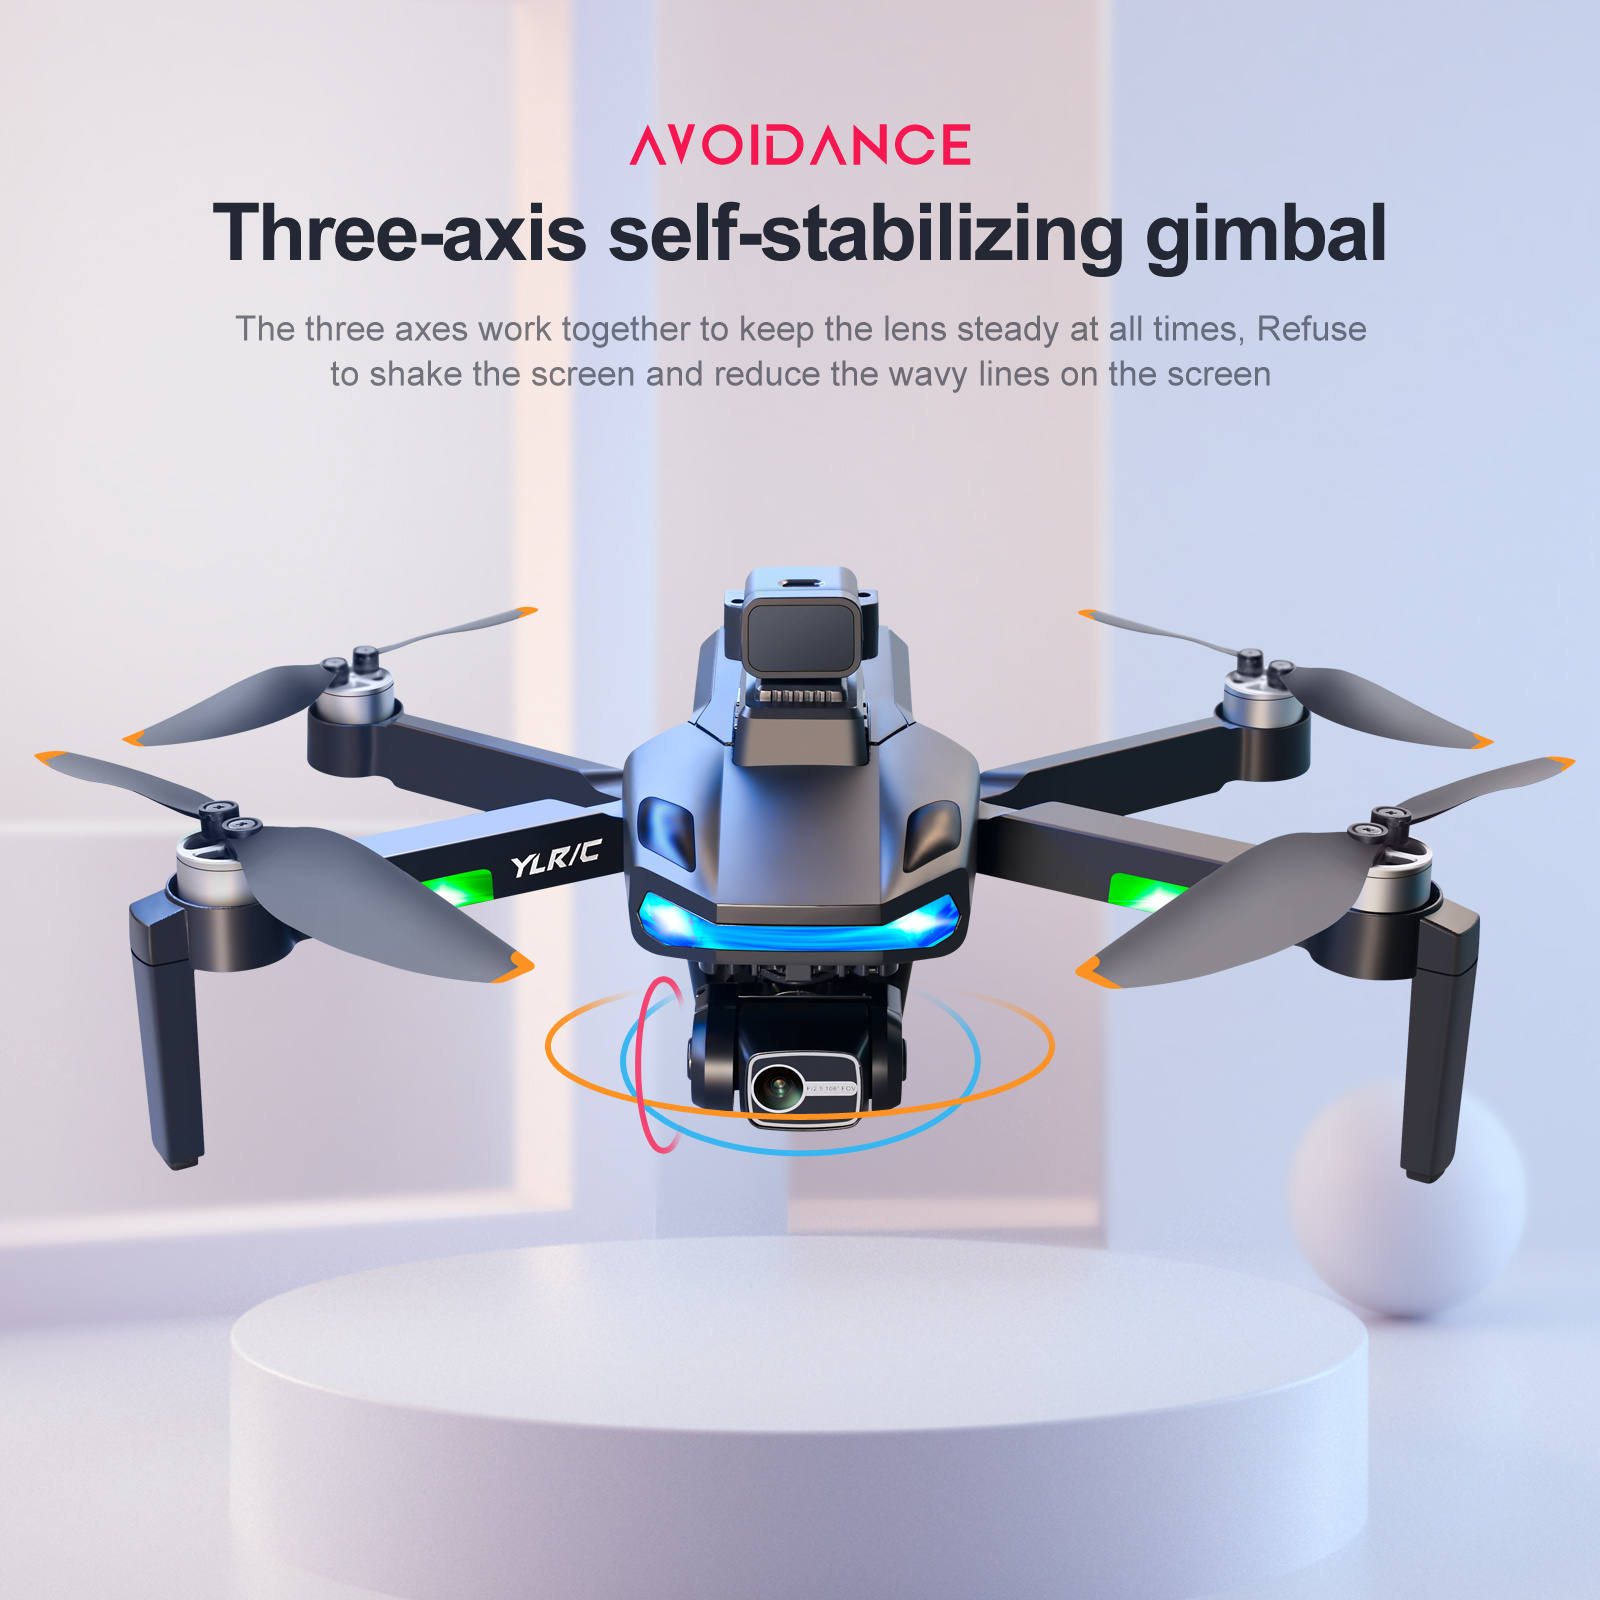 new s135 professional rc drone precise gps positioning powerful brushless motor with 1080p electric gimbal camera on three axis lcd display real time 5g signal transmission perfect toy gift teenager stuff uav quadcopter details 1